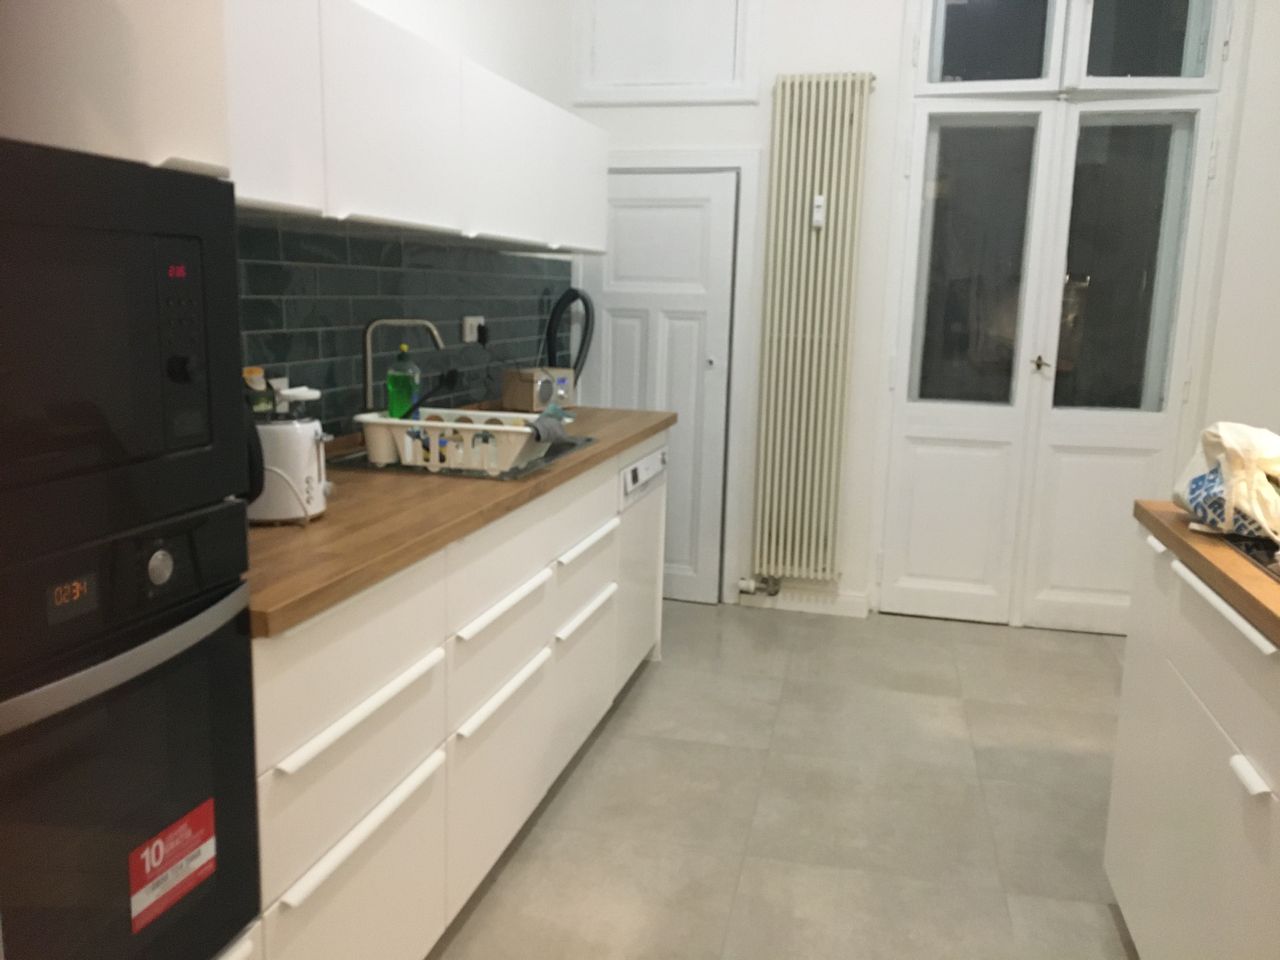 New furnished flat in Pankow next Bürgerpark